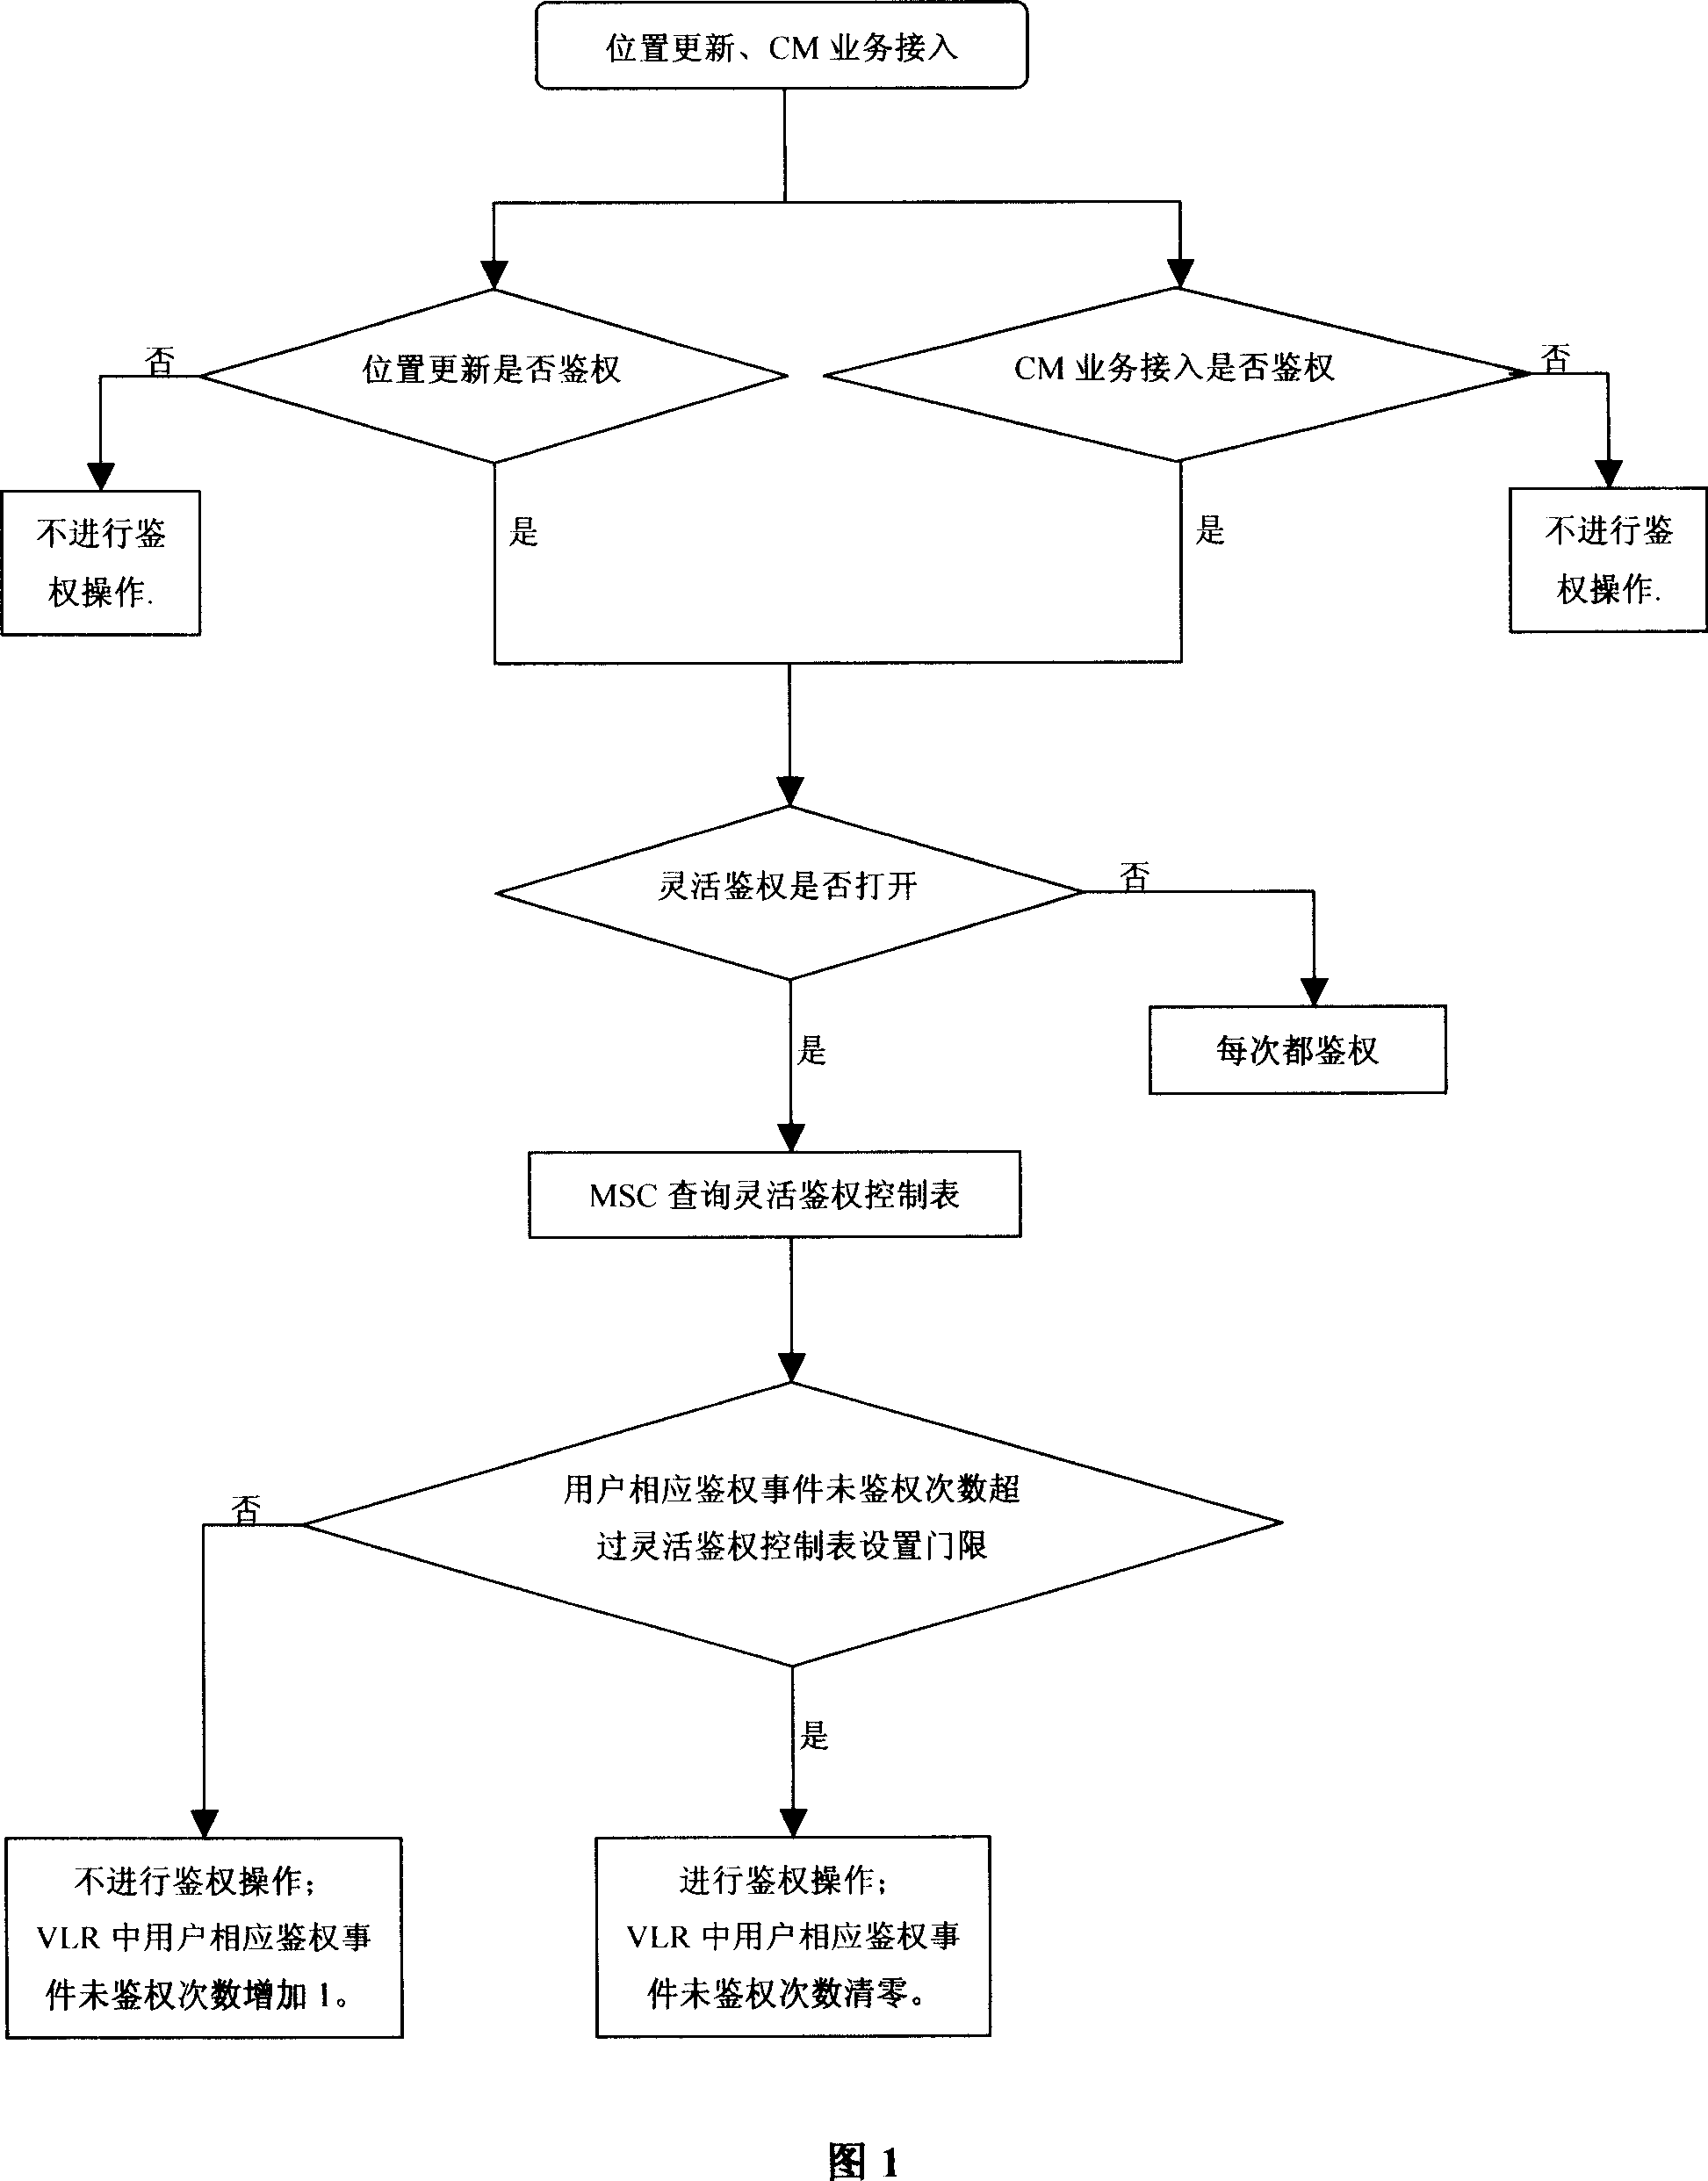 Method for controlling smart authentication